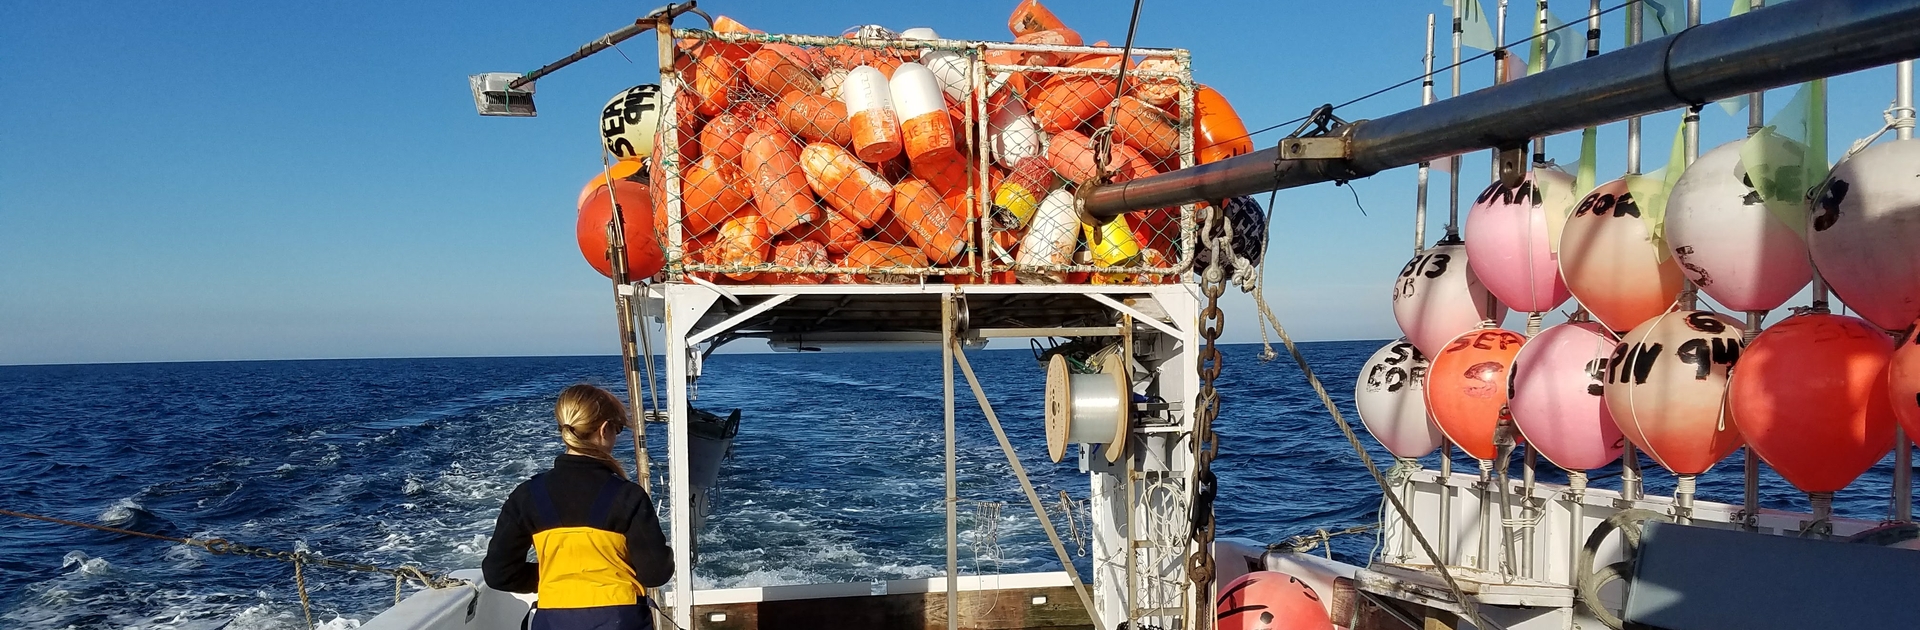 The bow of a research vessel filled with buoys and the wake of the boat.